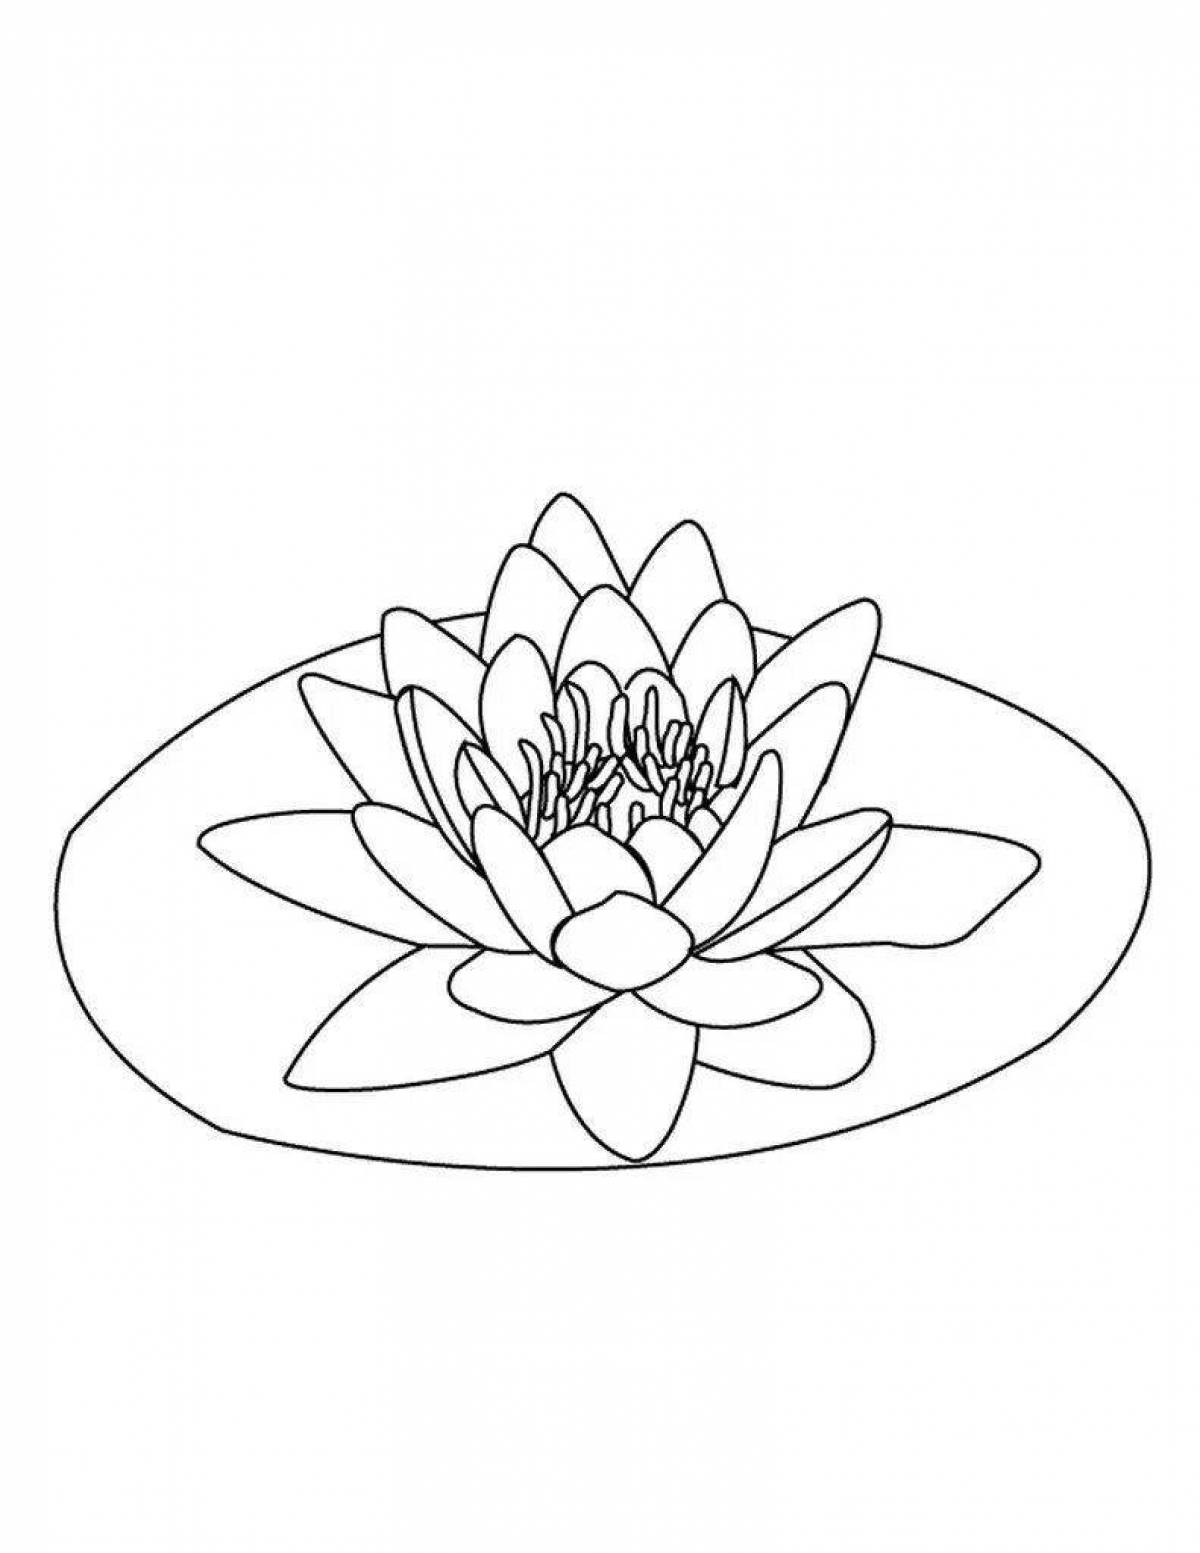 Luminous water lily coloring page